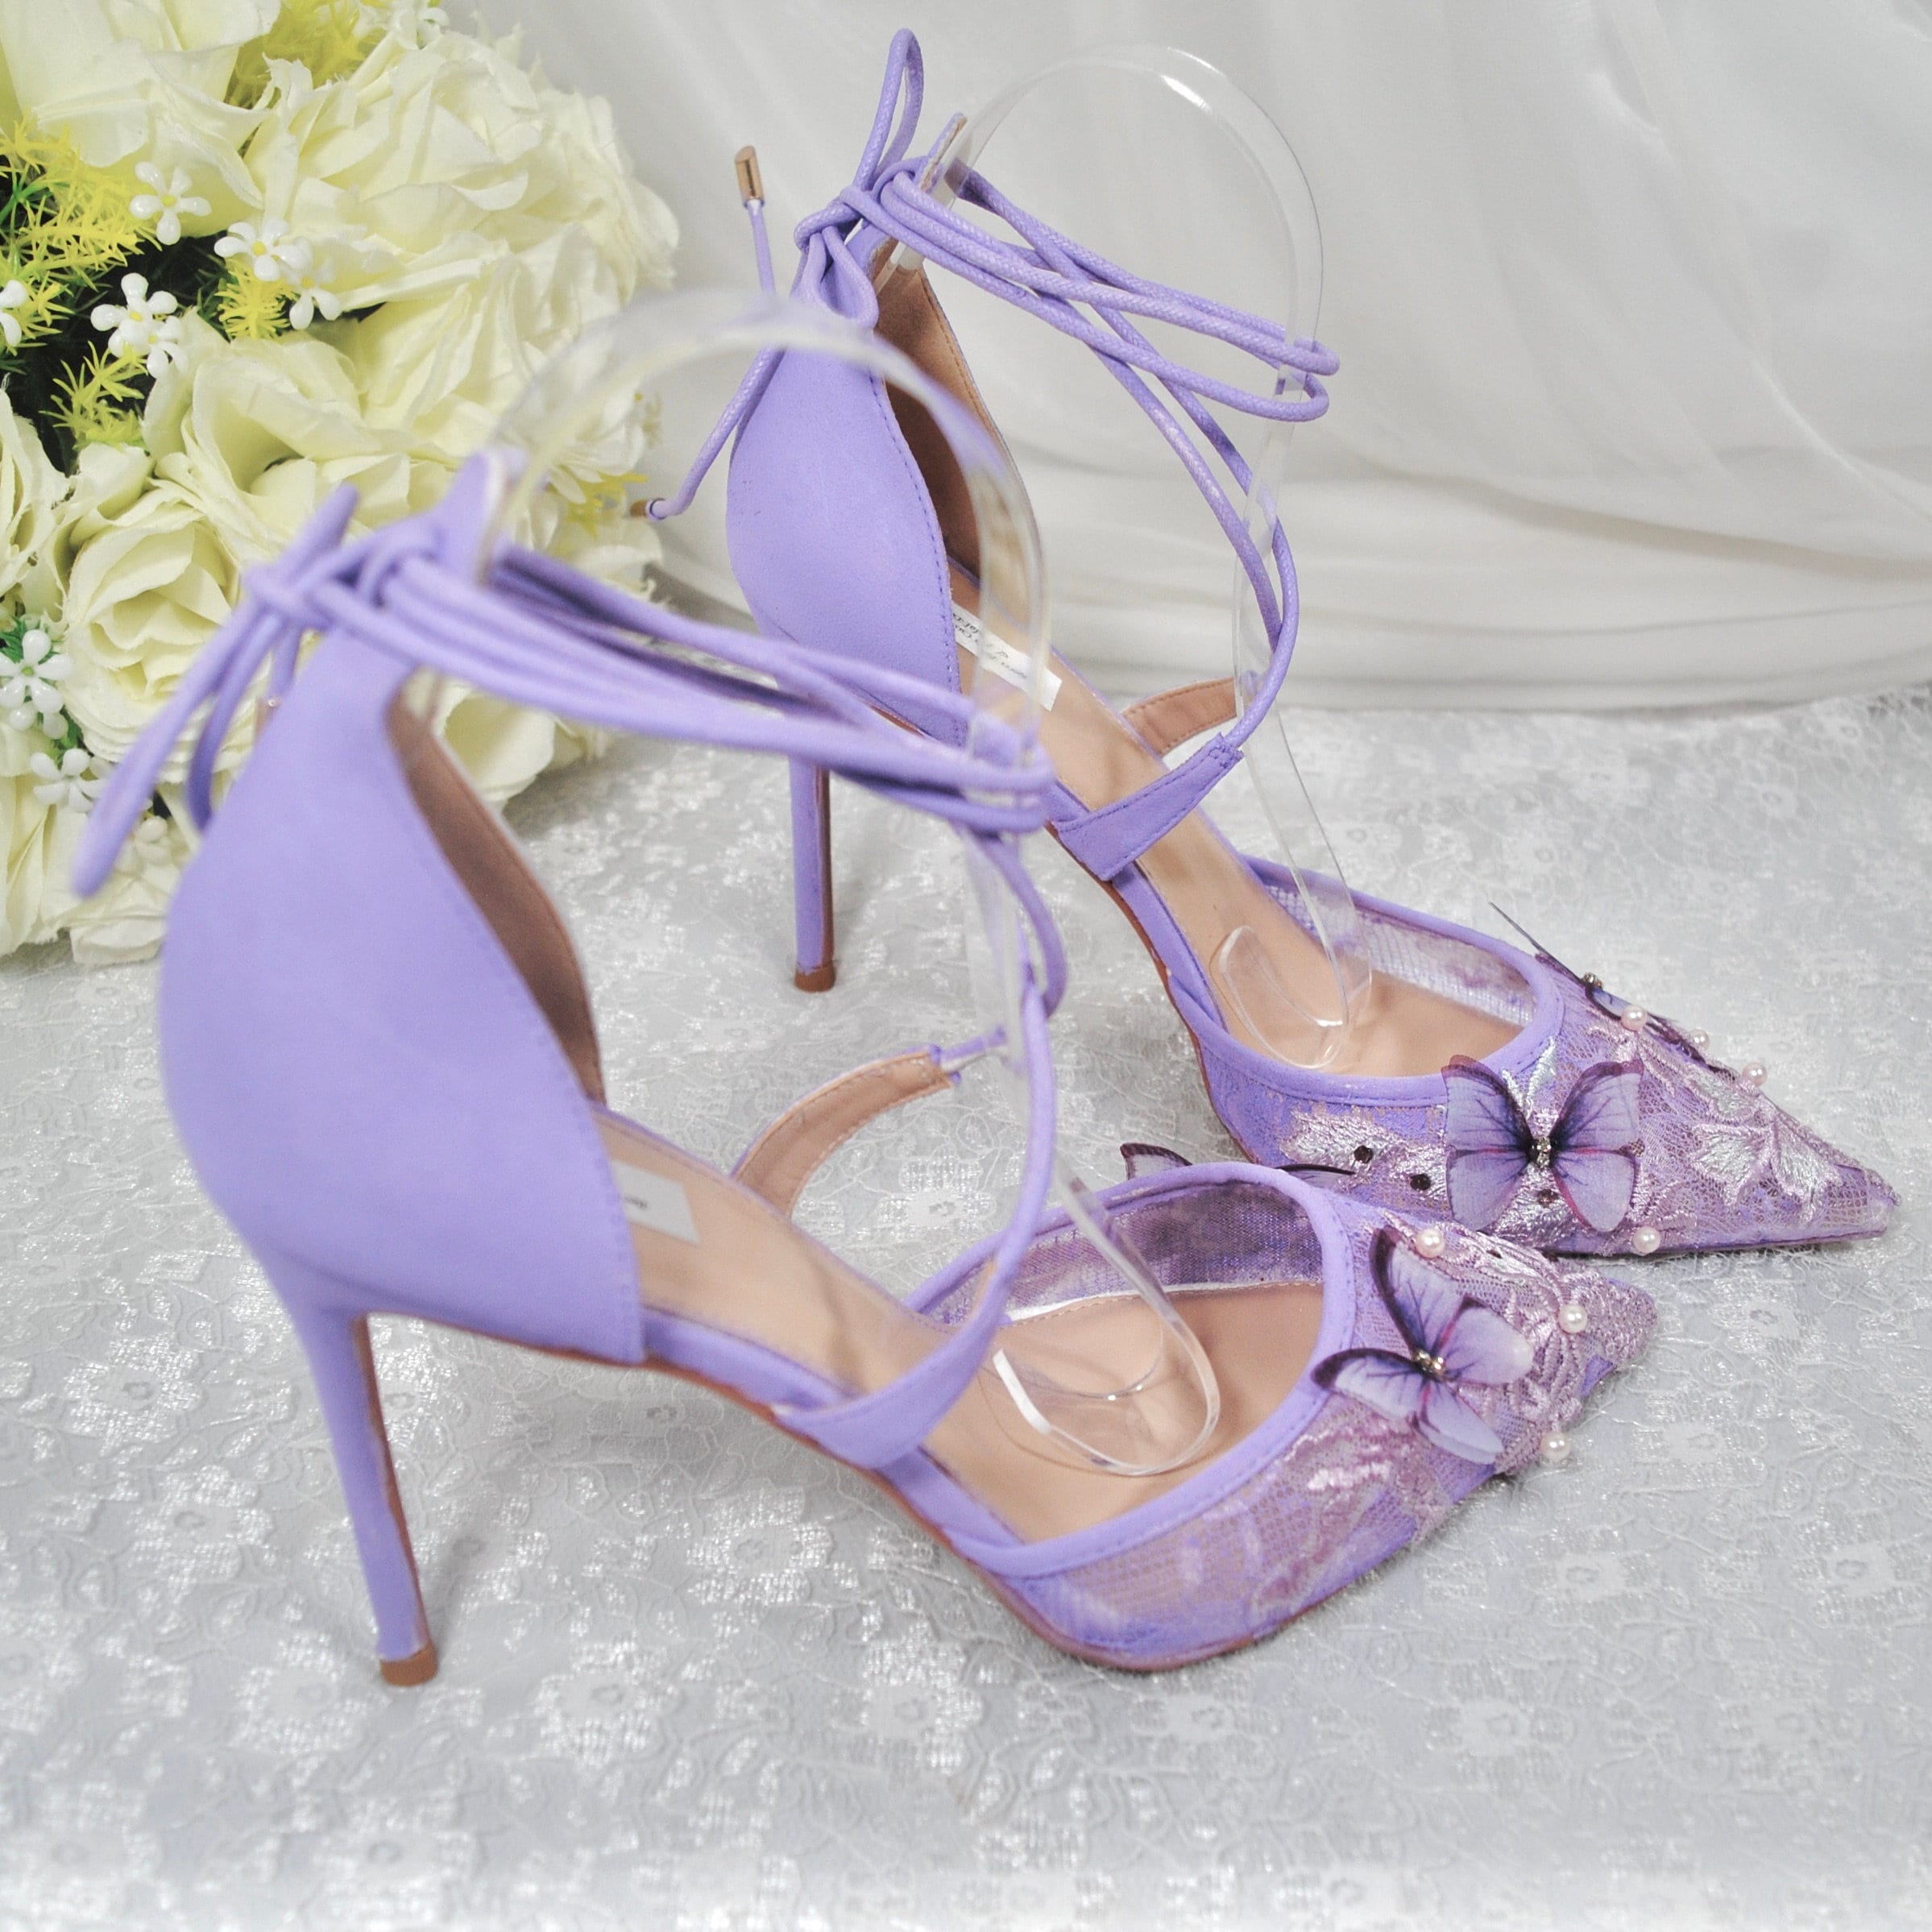 Emma Jones Chunky Square Heels Pumps Mary Janes Patent Button Decorated  Strap Sandals - Lavender SPECIAL - Size 13 in Specials - $70.39